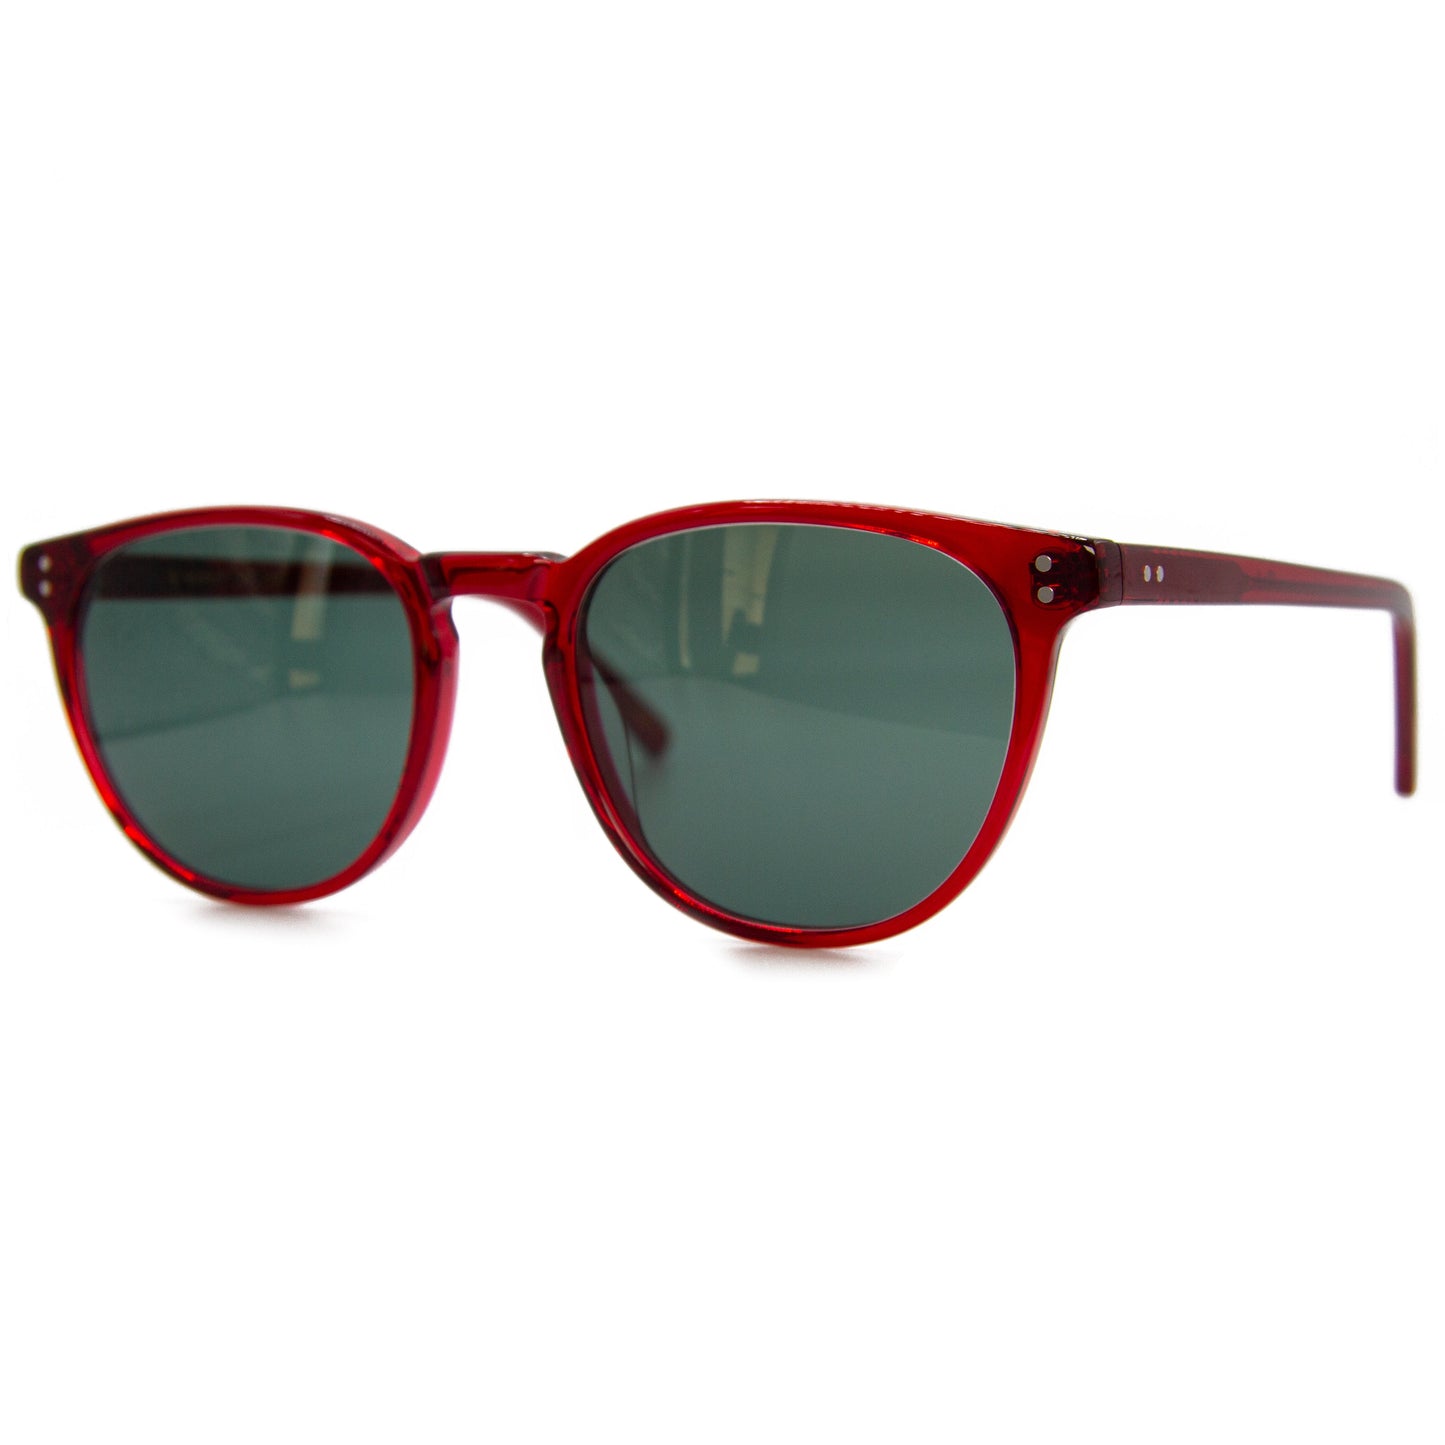 3 brothers - Ant - Red - Prescription Sunglasses - Side